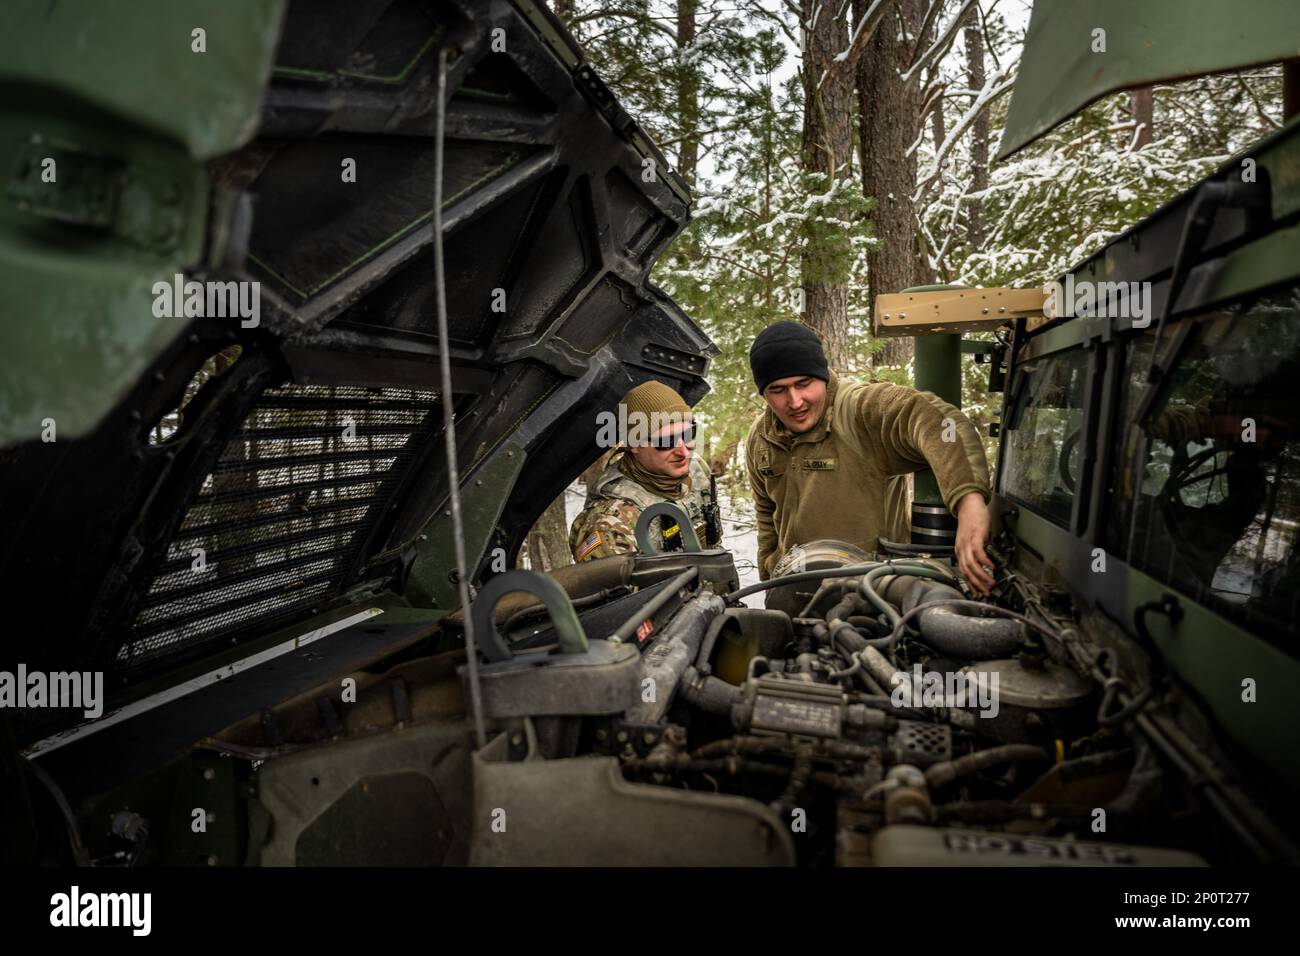 Army Sgt. Josh Harris shows SFC. Jeff Smith, 1-120th Field Artillery Regiment, the issue with the engine on the M1151 Humvee during Northern Strike 23-1, Jan. 23, 2023, at Camp Grayling, Mich. Units that participate in Northern Strike’s winter iteration build readiness by conducting joint, cold-weather training designed to meet objectives of the Department of Defense’s Arctic Strategy. Stock Photo